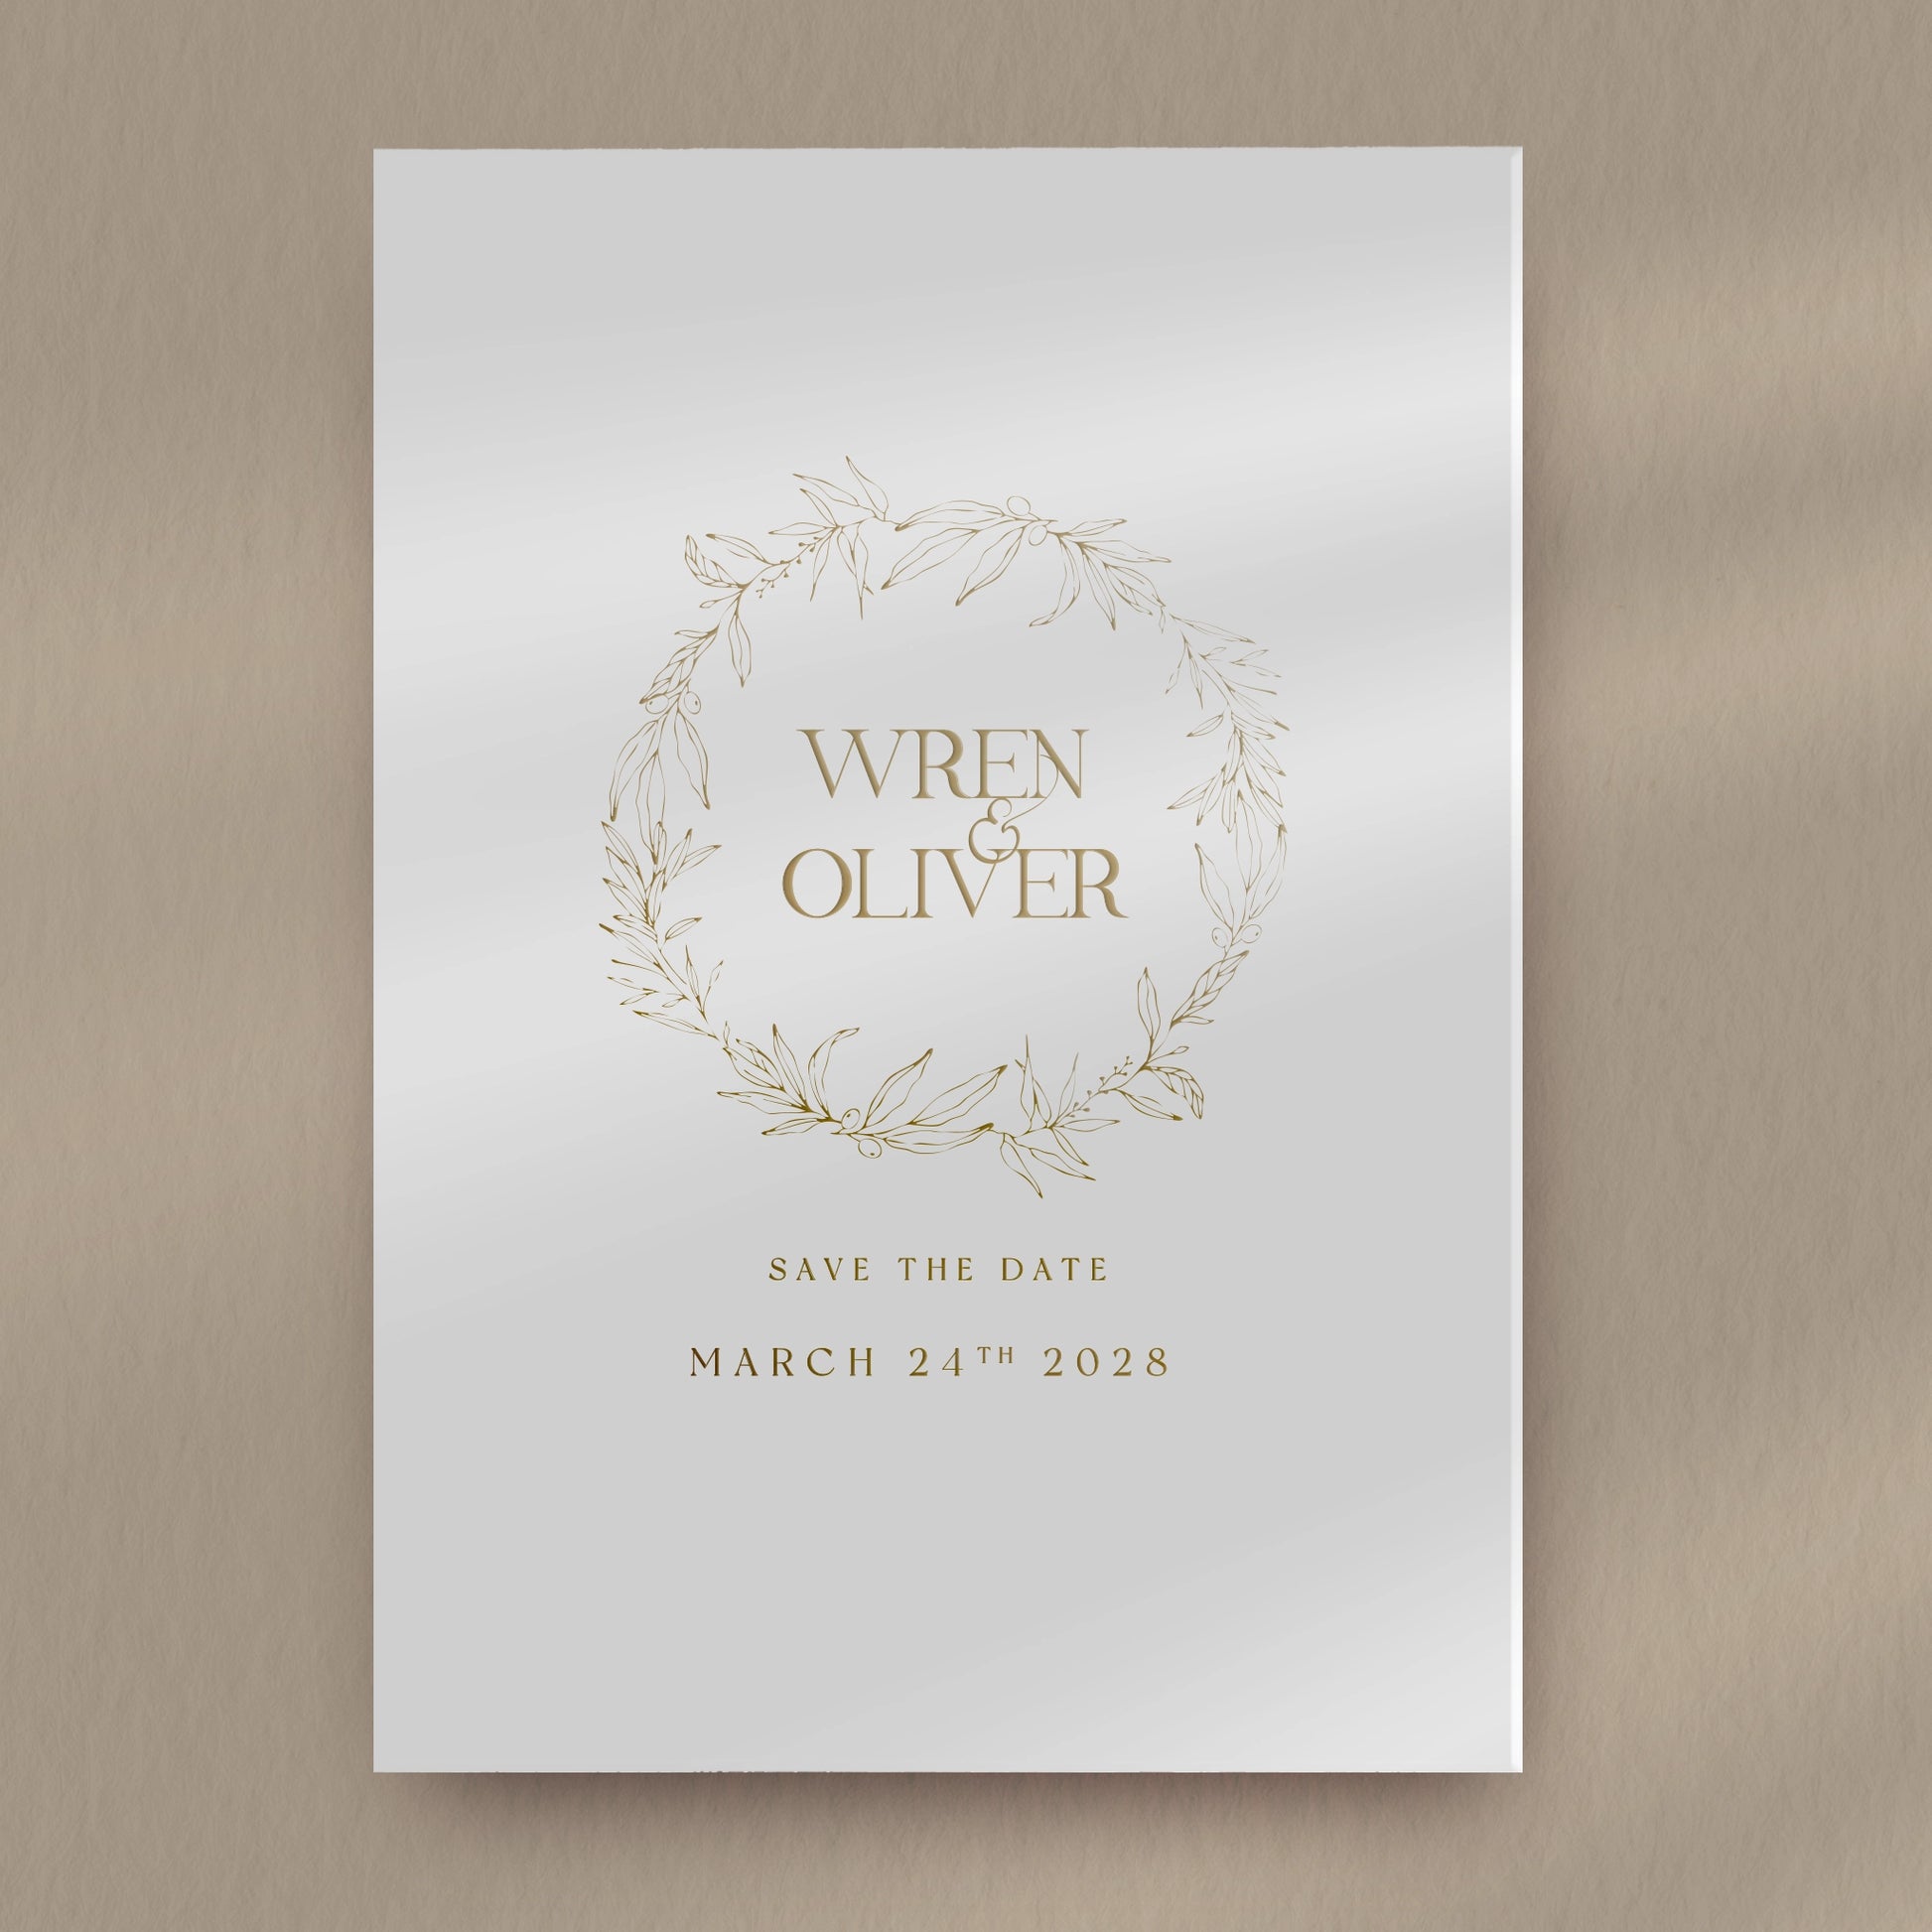 Save The Date Sample  Ivy and Gold Wedding Stationery Wren  